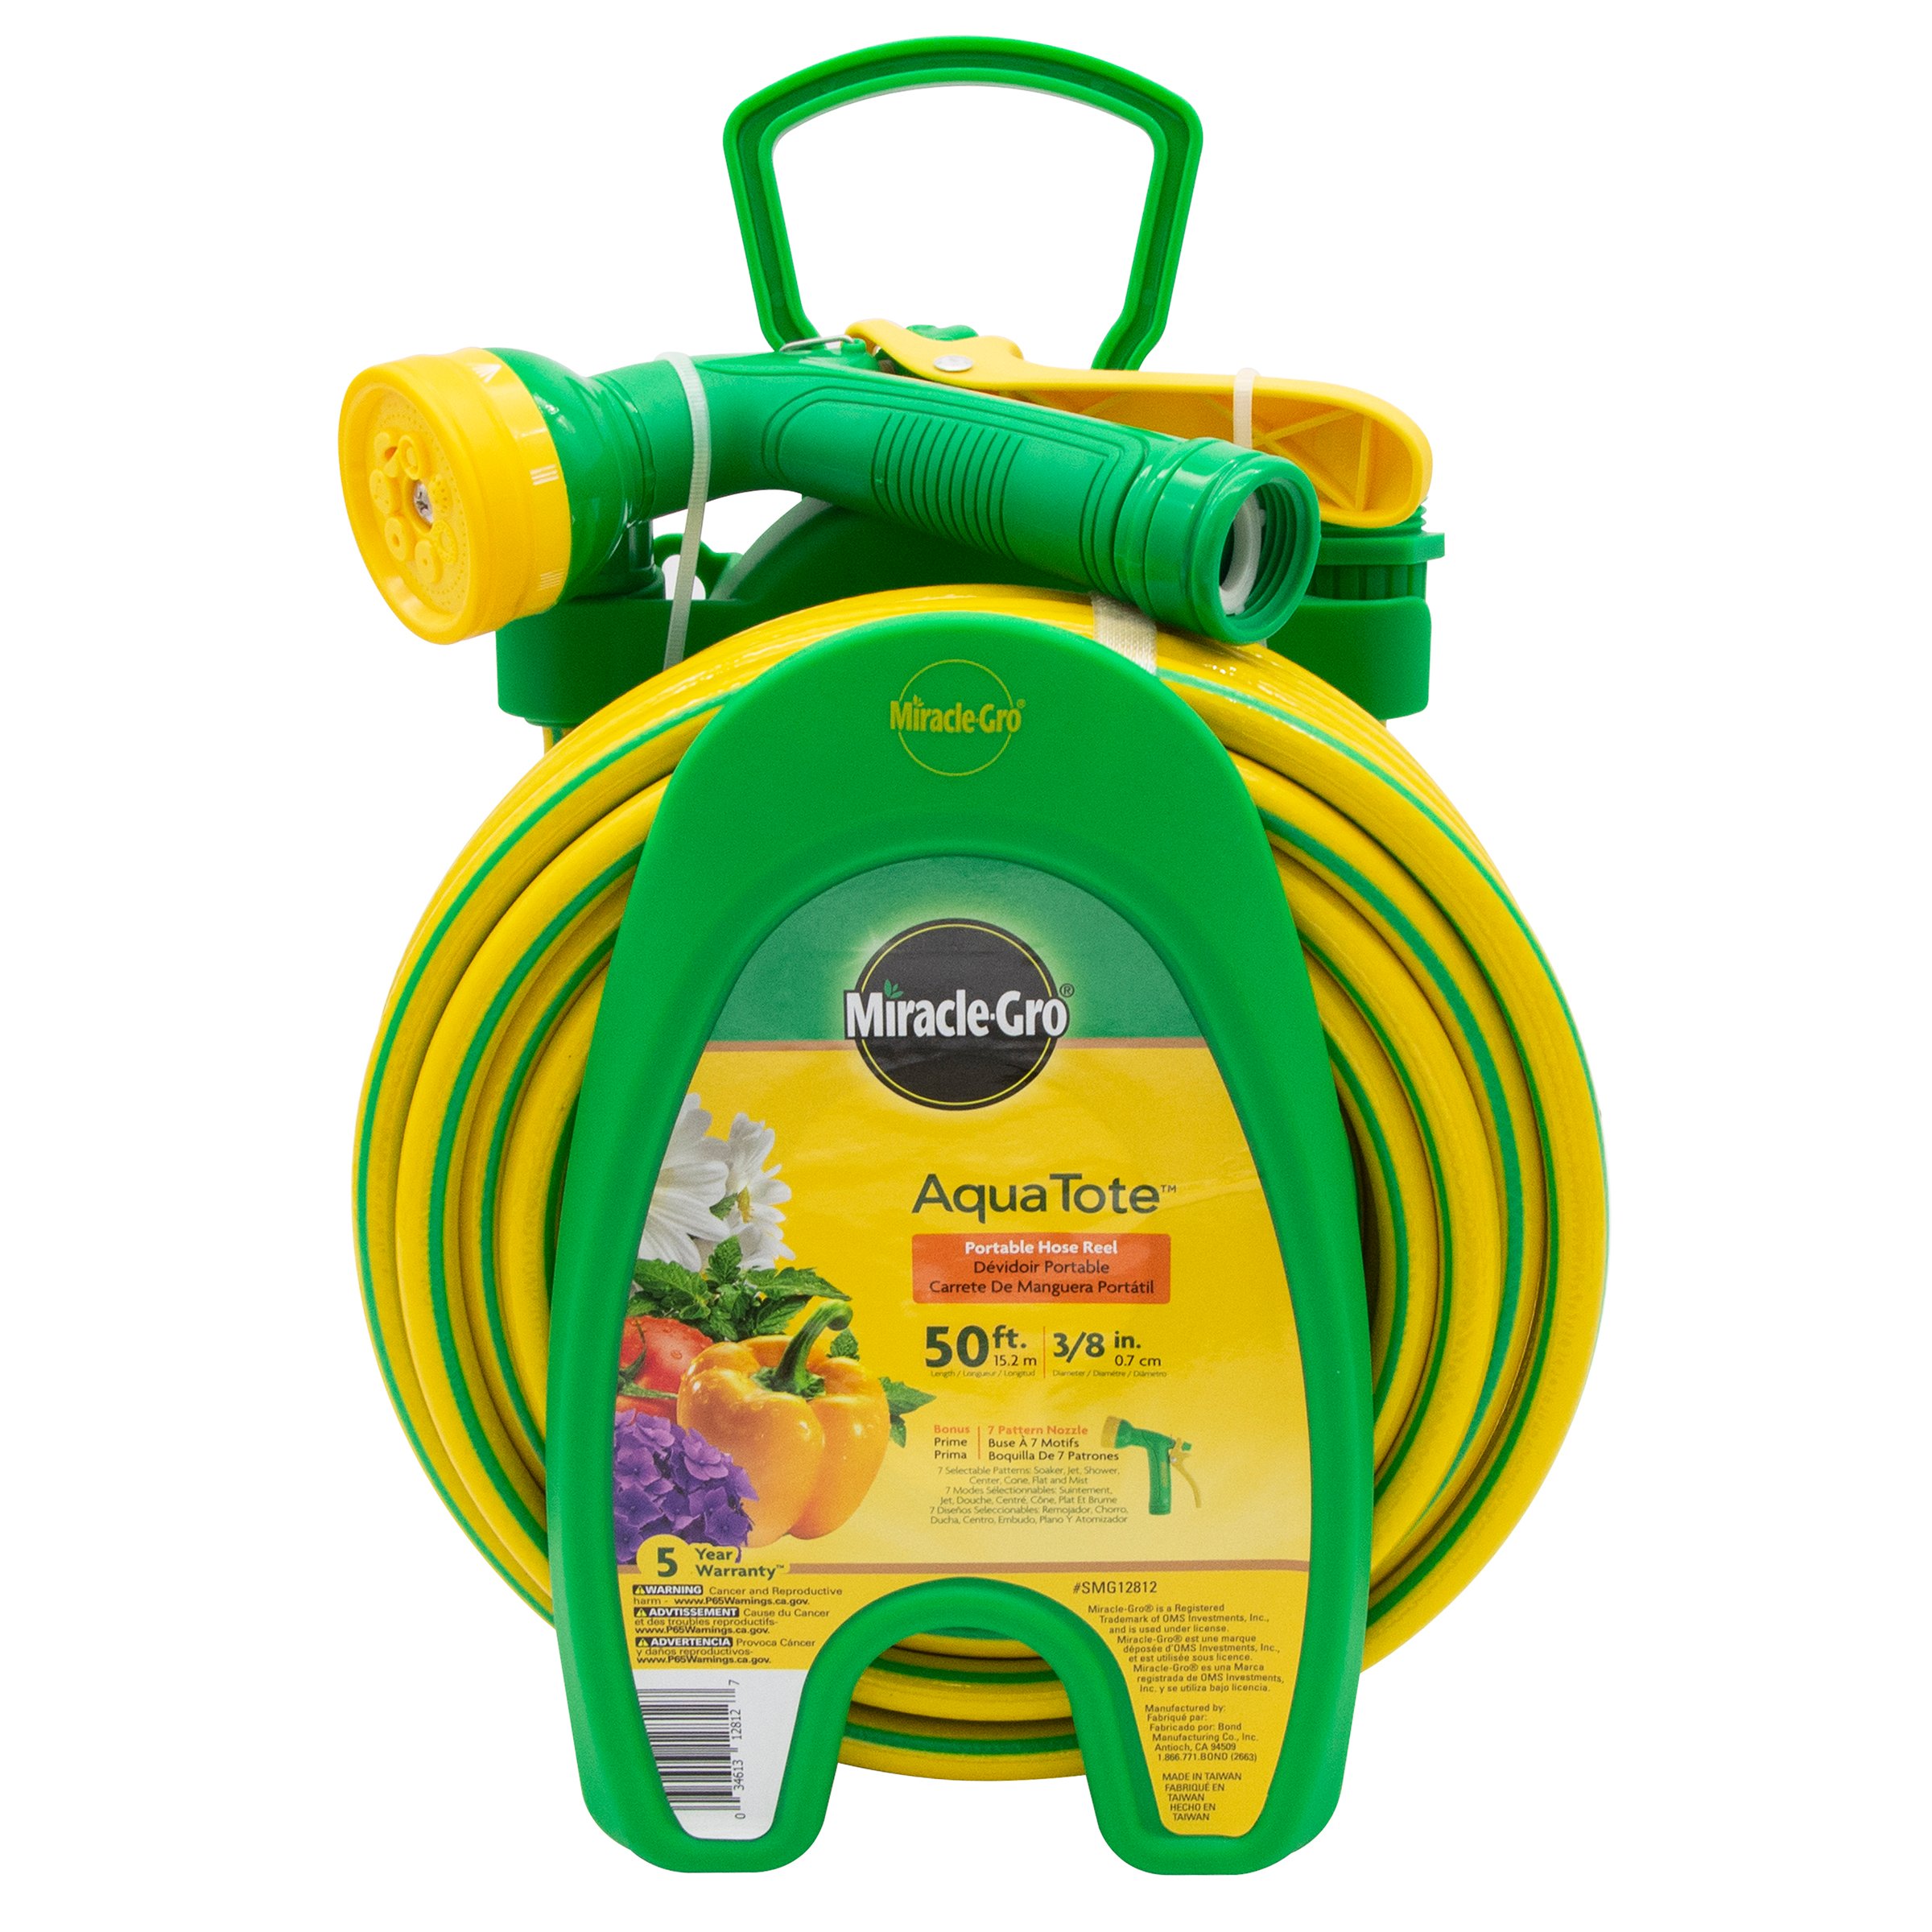 Miracle-Gro Aqua Tote Portable Hose Reel with Nozzle - Shop Hoses & Watering  at H-E-B